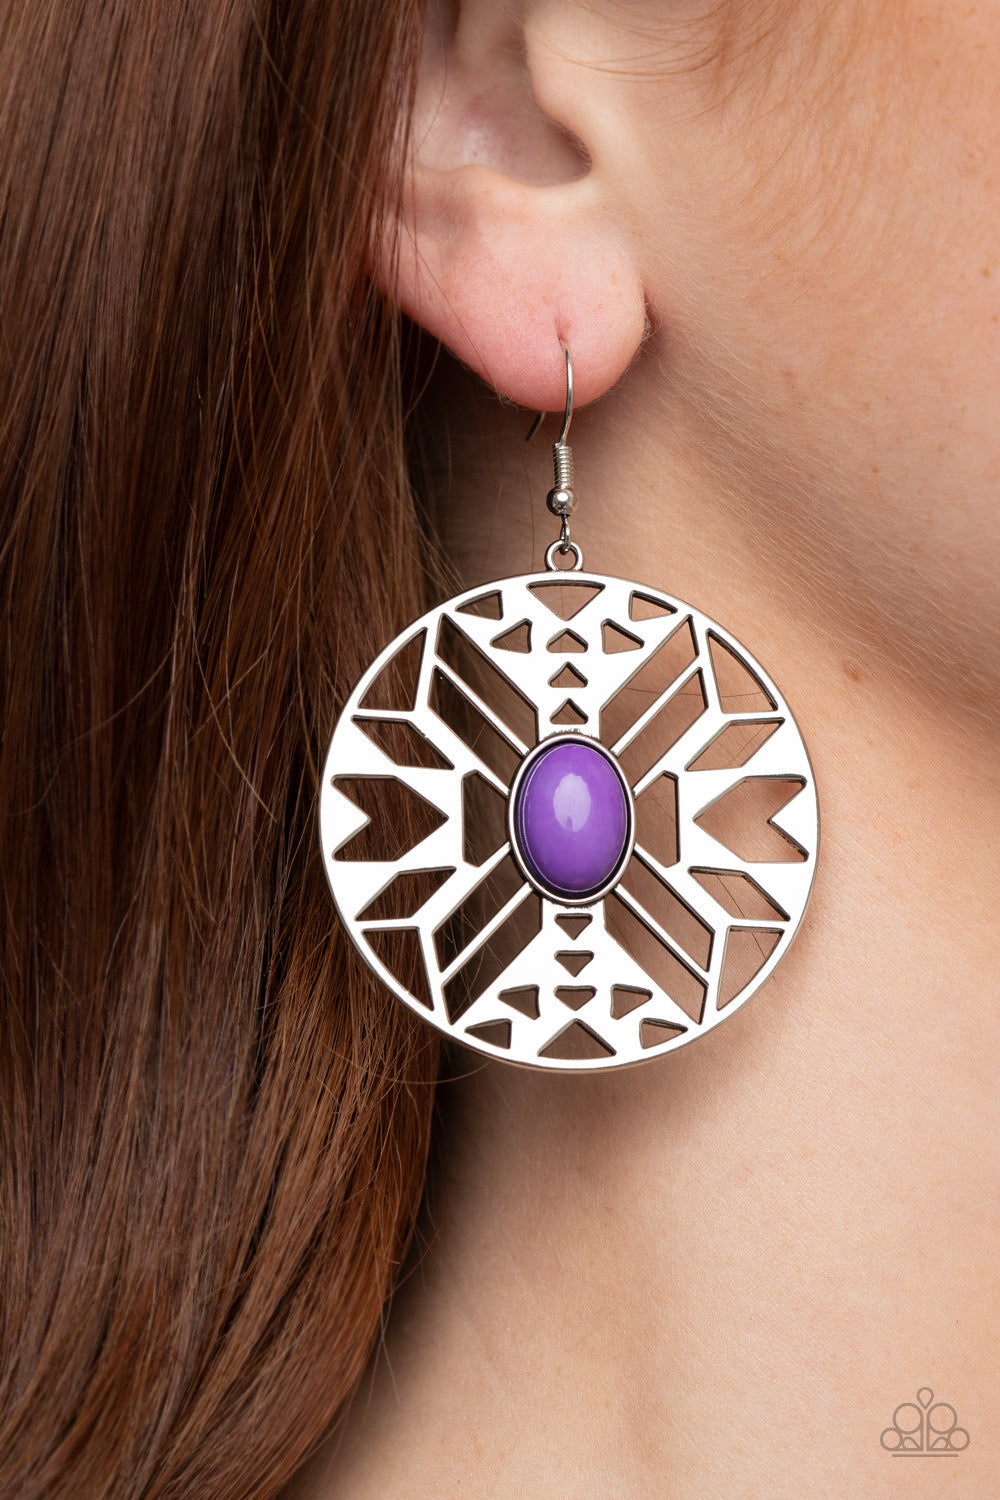 Southwest Walkabout - Purple and Silver Earrings Silver Earrings - Paparazzi Jewelry - Bejeweled Accessories By Kristie - An oval purple bead adorns the center of a round silver frame radiating with an airy southwestern inspired pattern for a whimsical look. Earring attaches to a standard fishhook fitting. Sold as one pair of earrings.